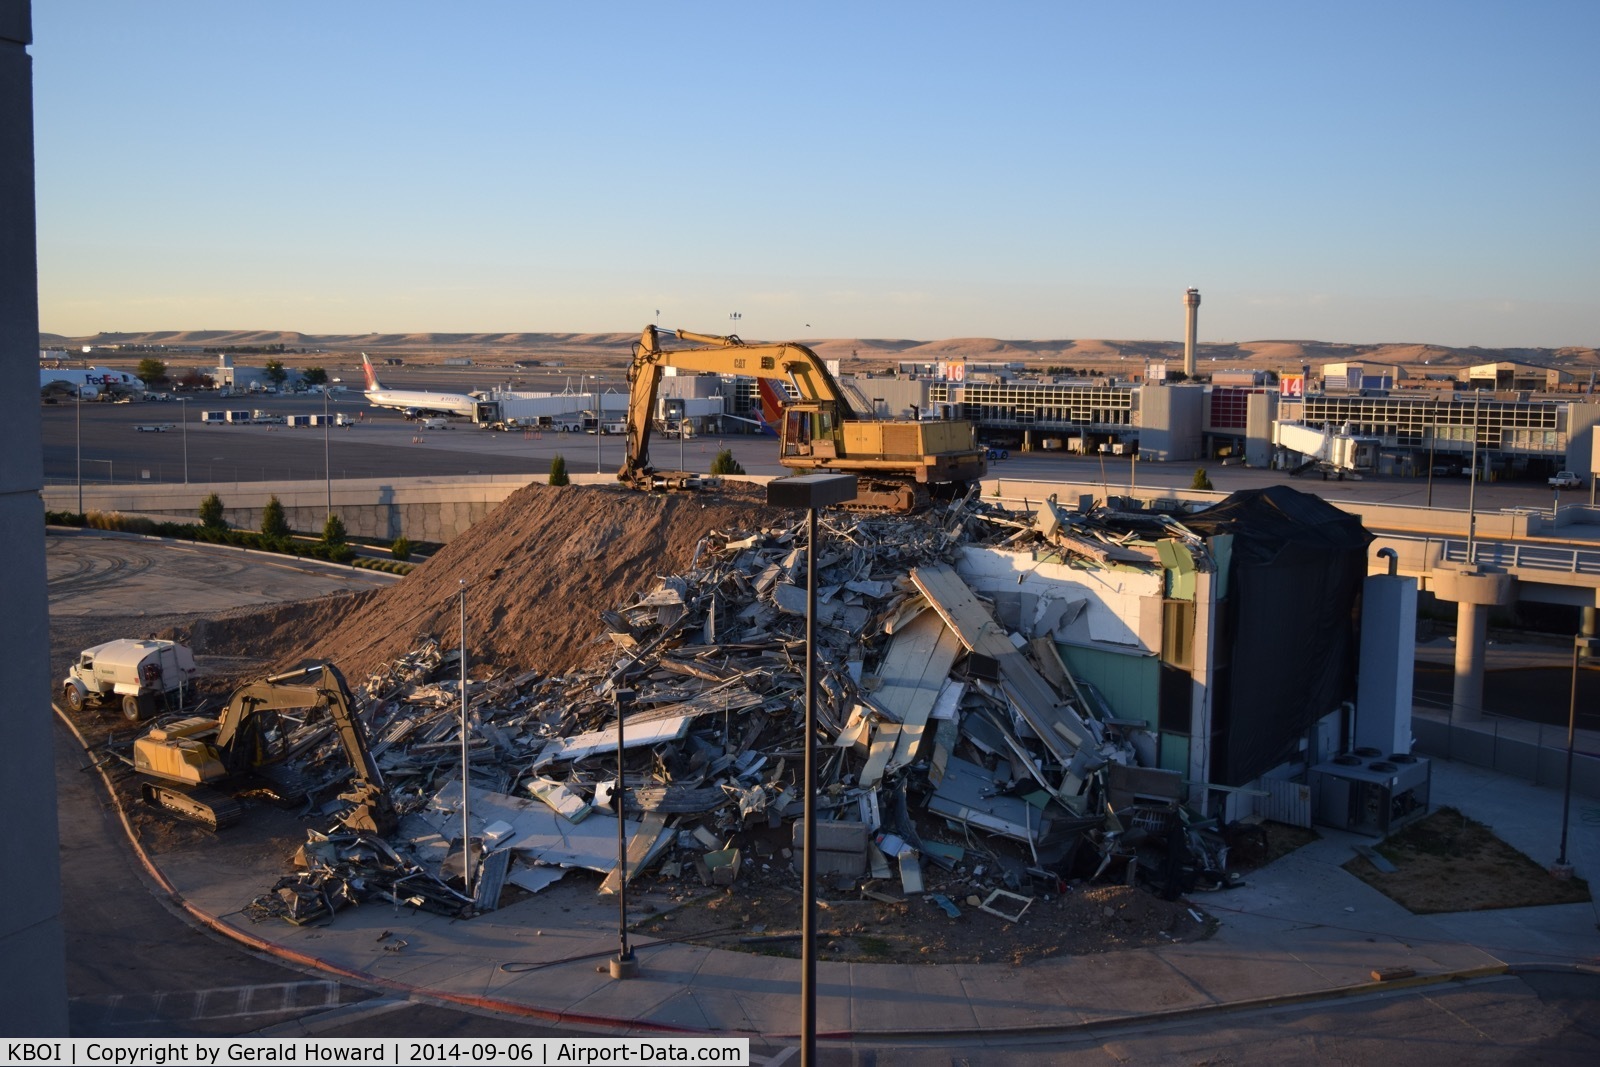 Boise Air Terminal/gowen Fld Airport (BOI) - Almost finished with old tower removal. Soon to be more parking spaces.